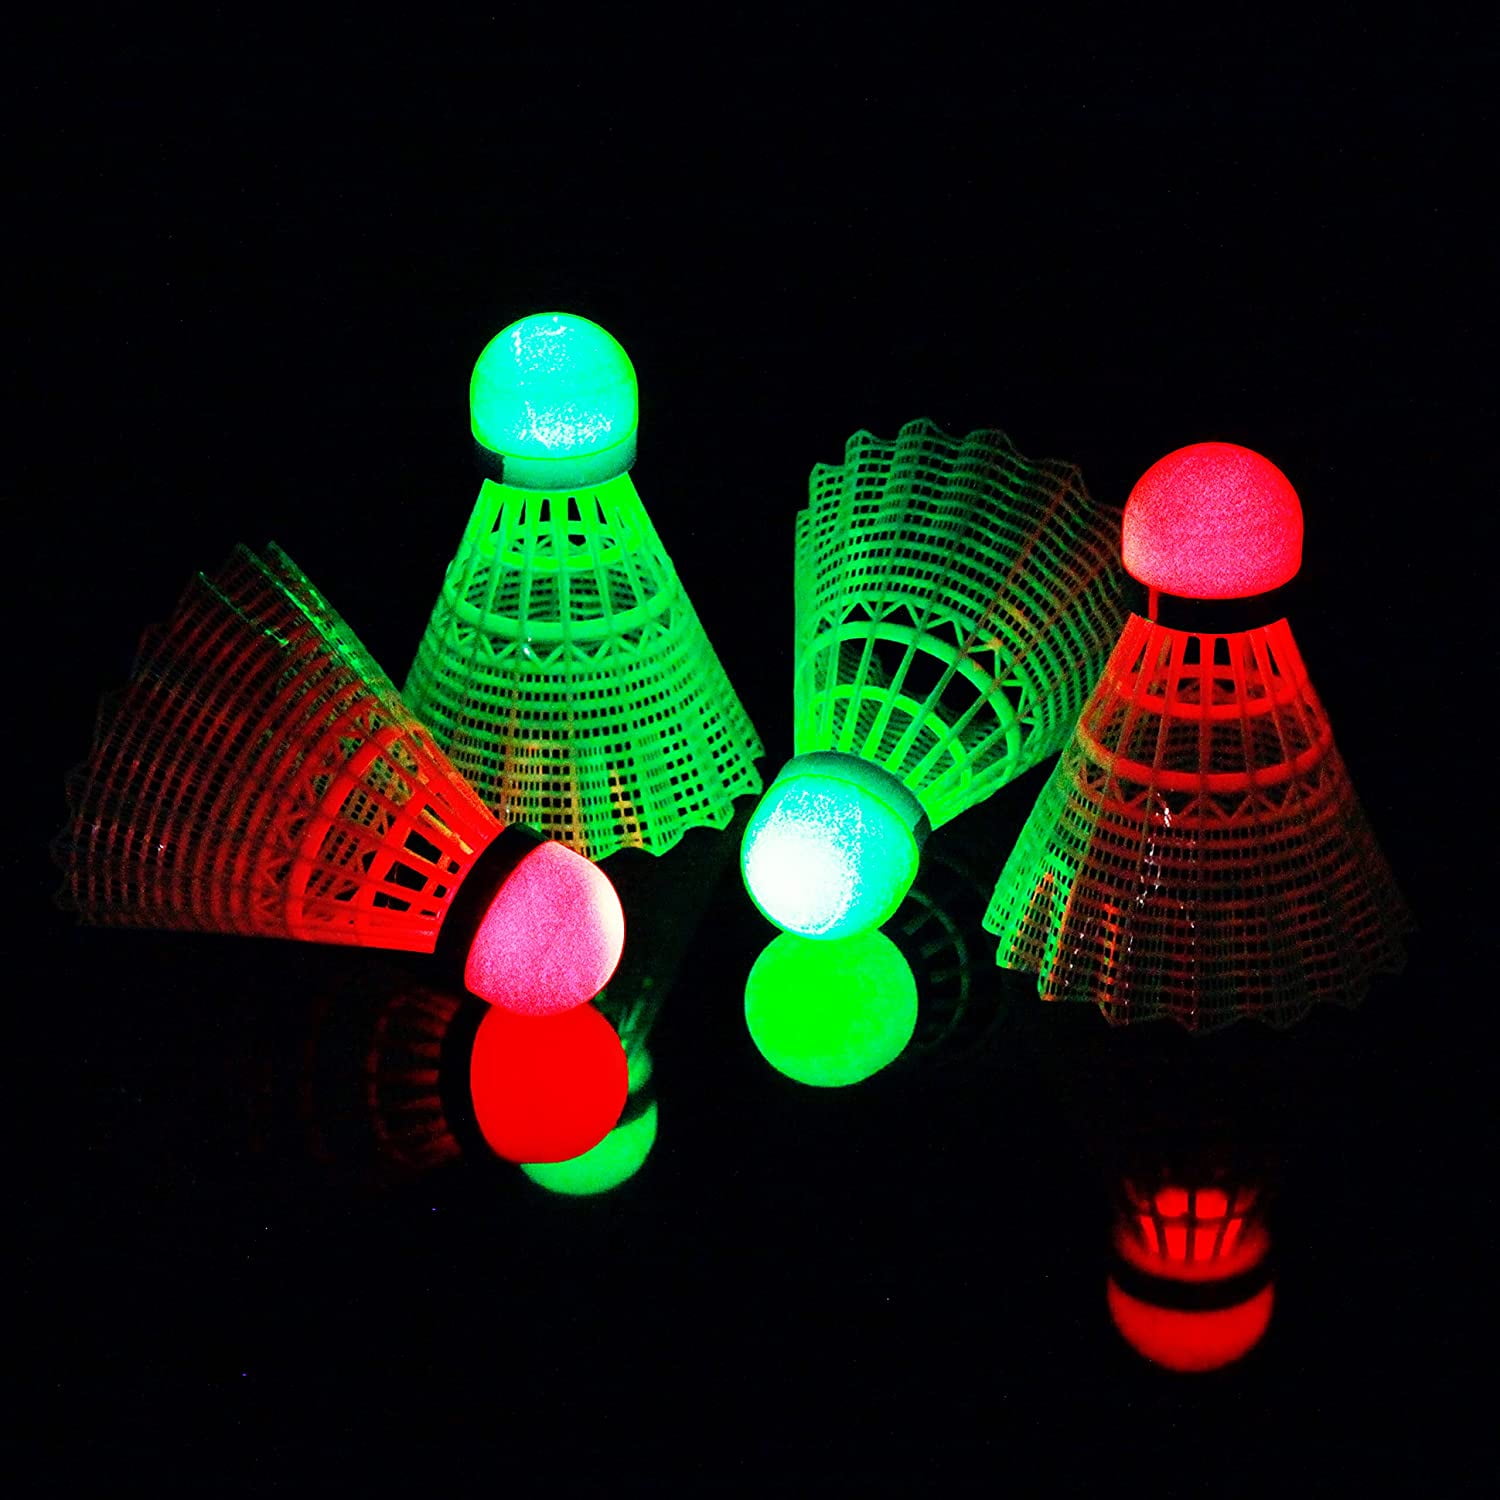 4 Pieces LED Badminton Dark Night Glow Colorful Feather Yard Shuttlecock 